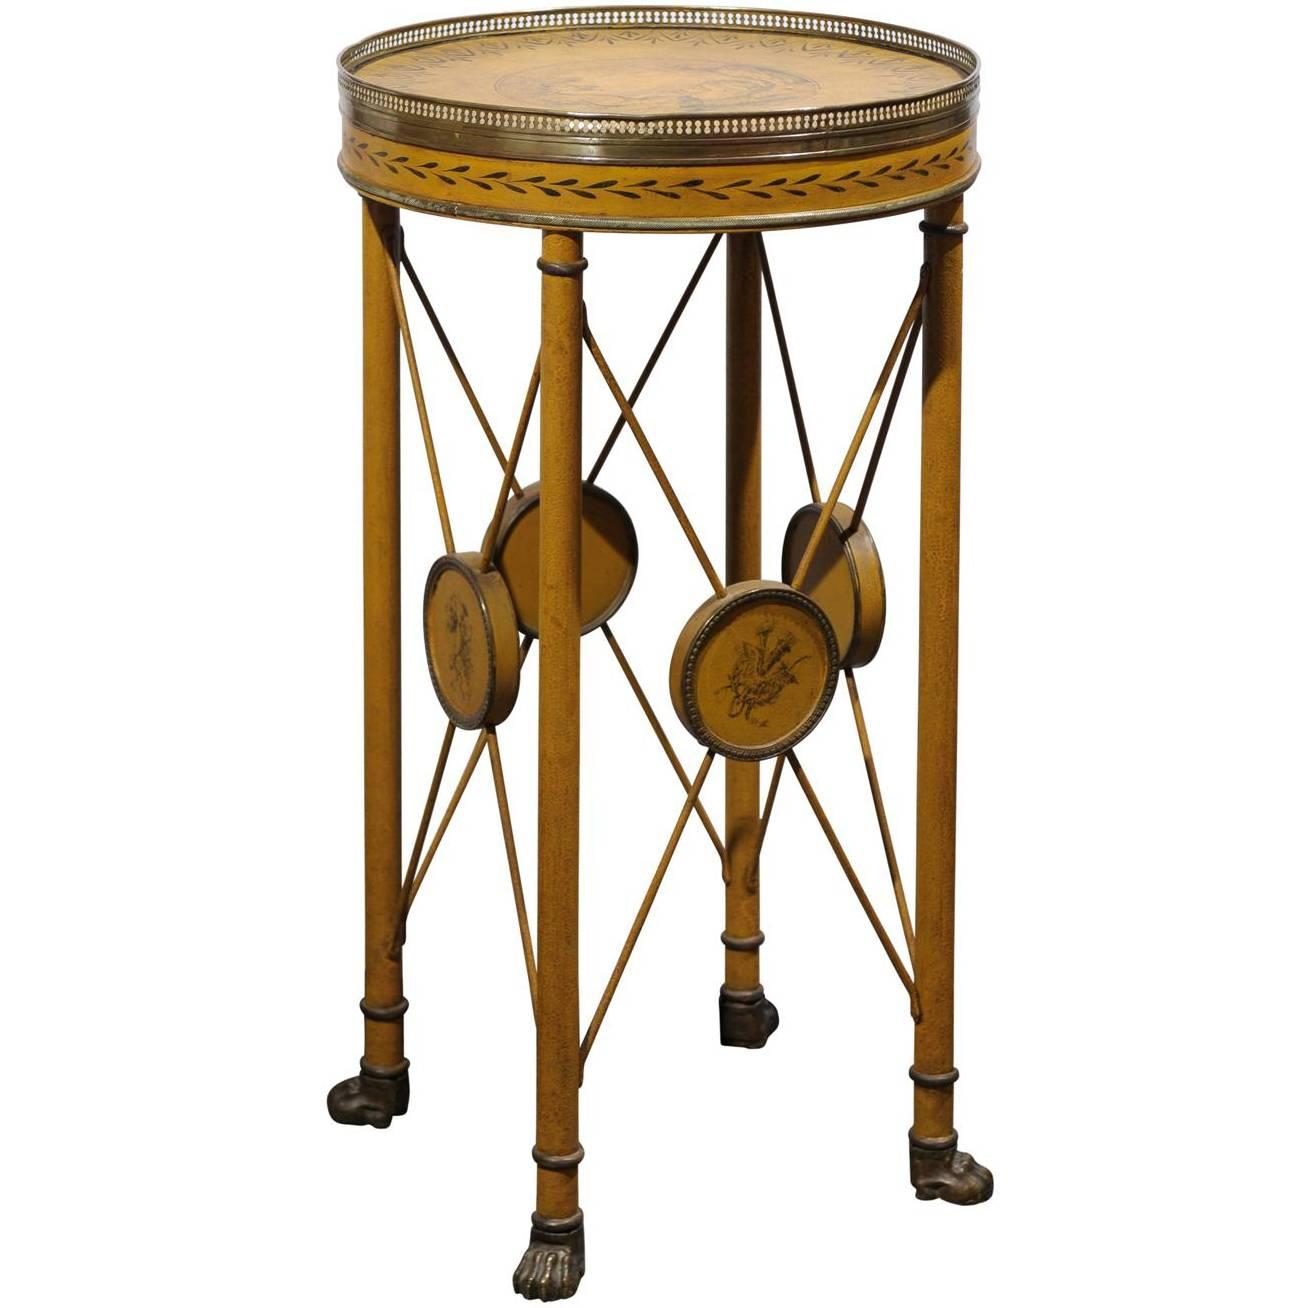 French 1880s Painted Tole Guéridon Table with Brass Accents and Side Stretchers